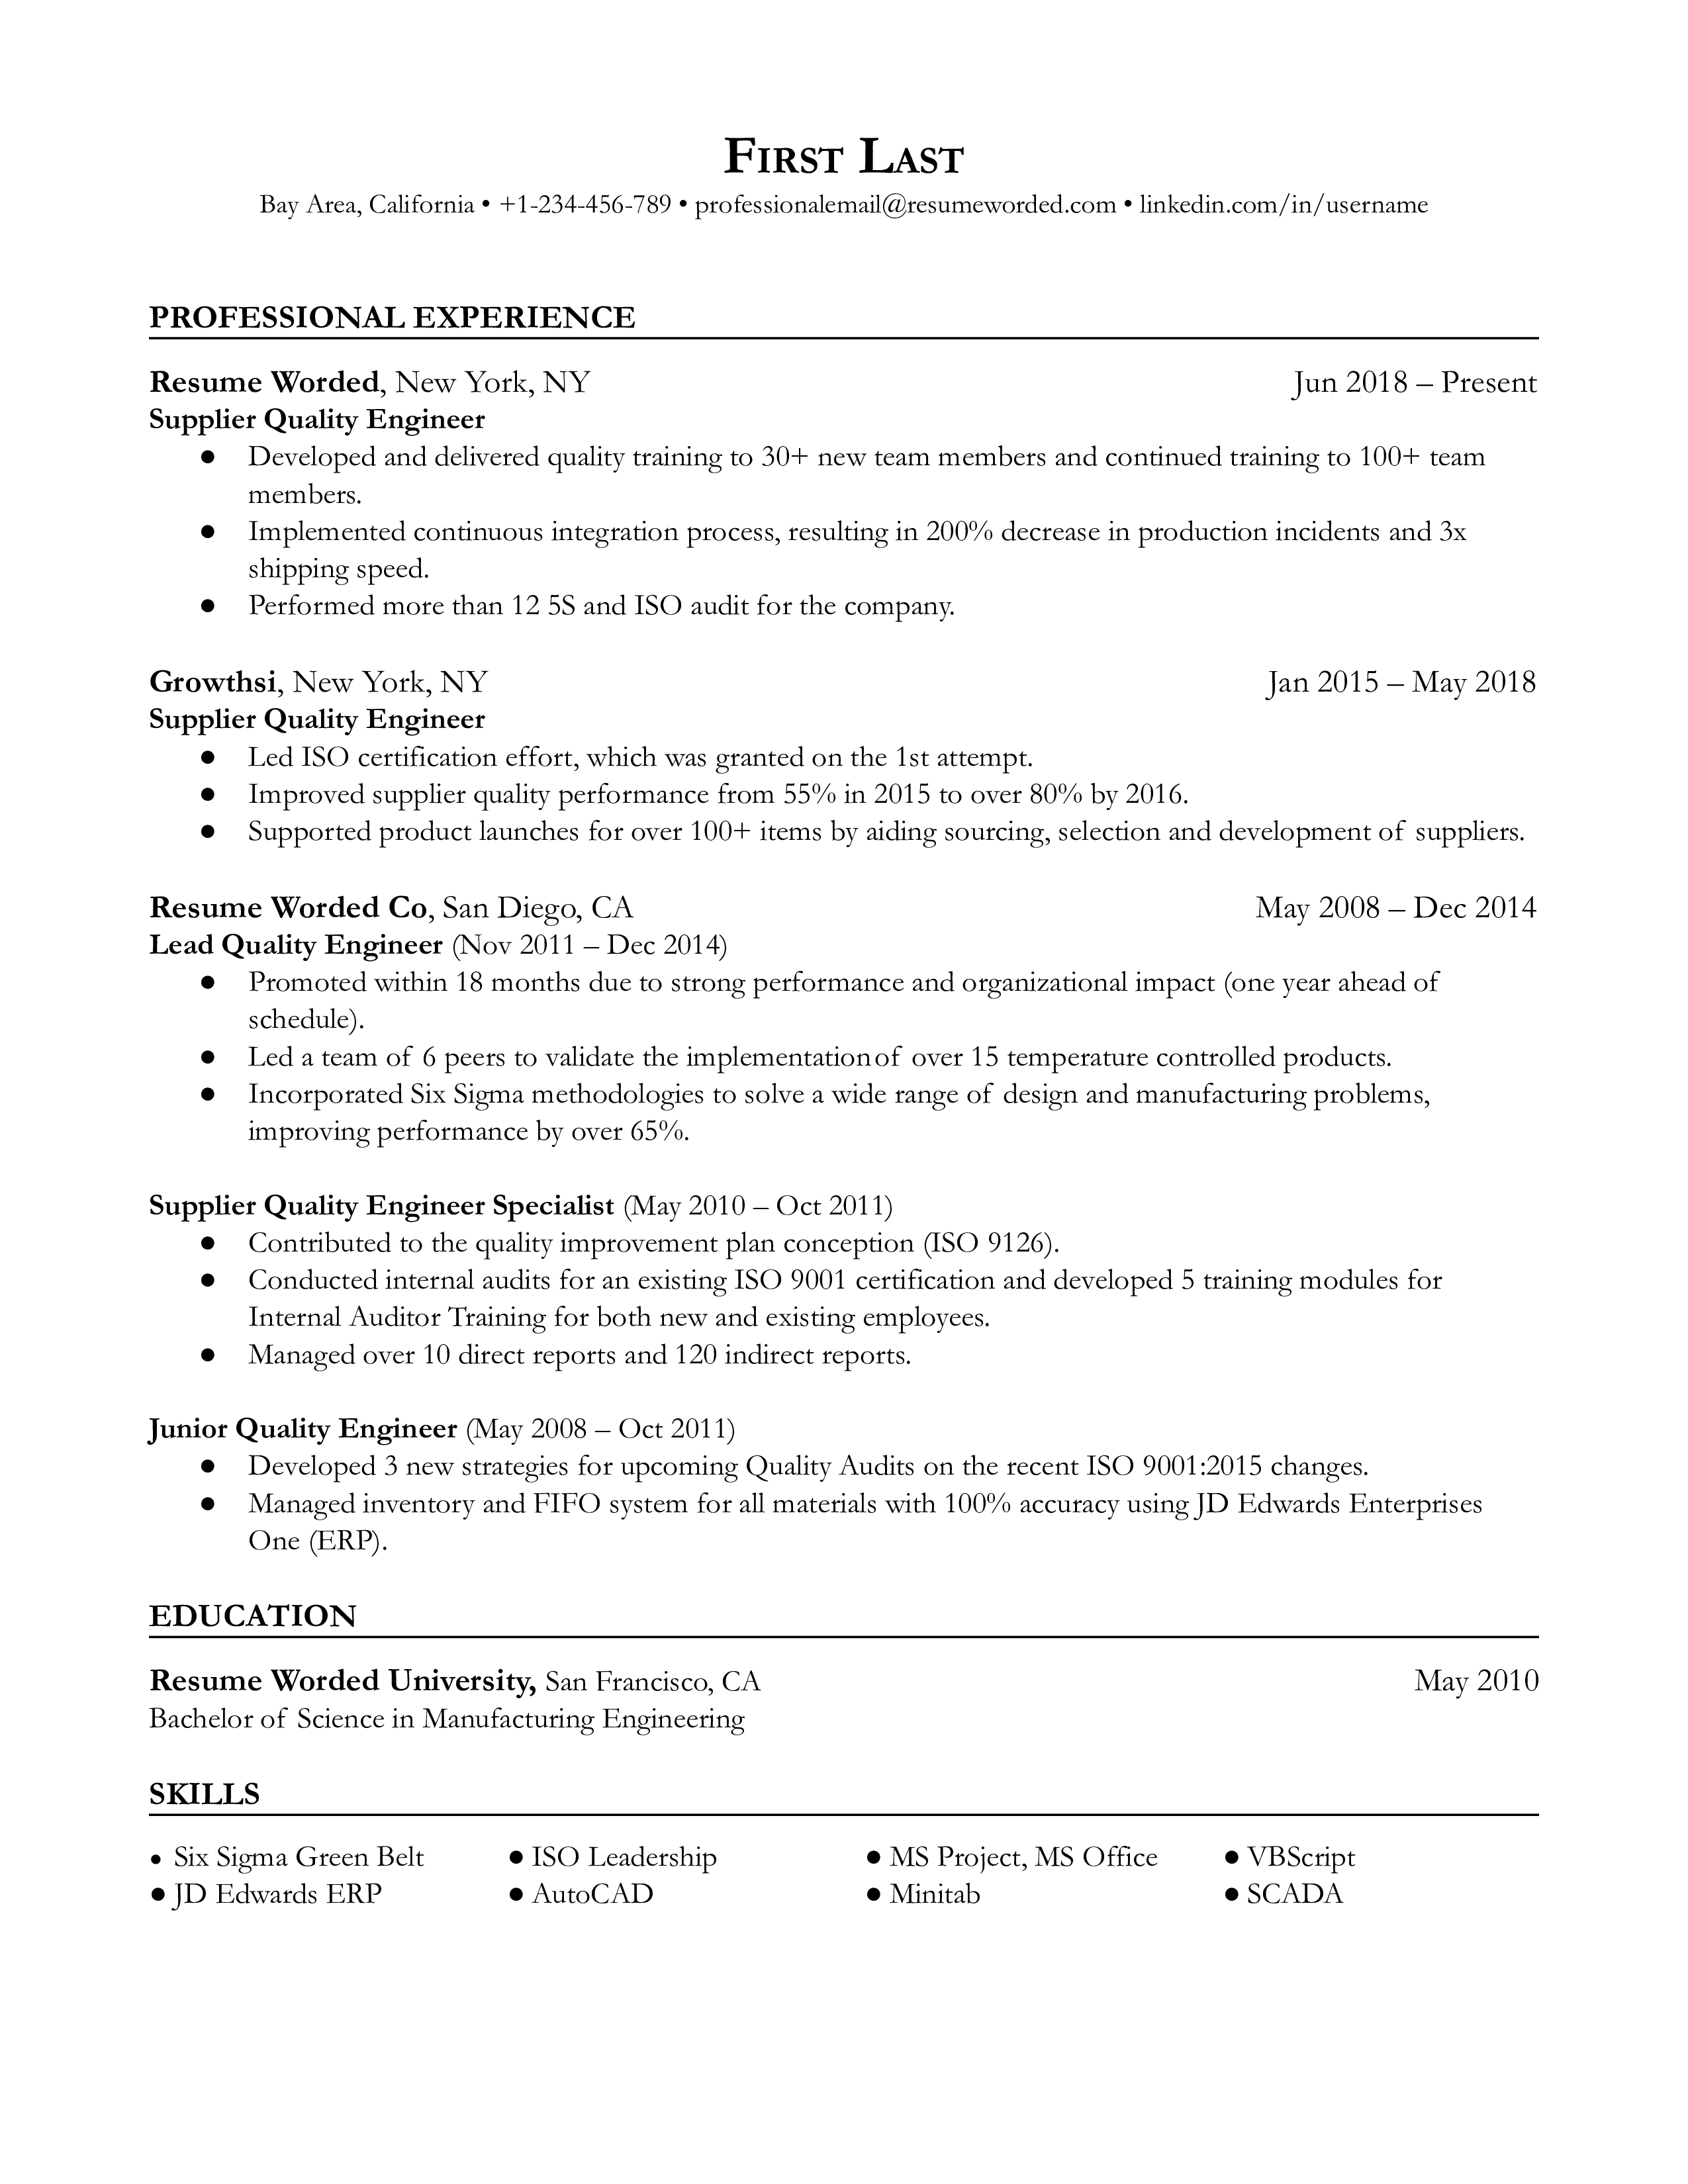 Supplier Quality Engineer Resume Sample